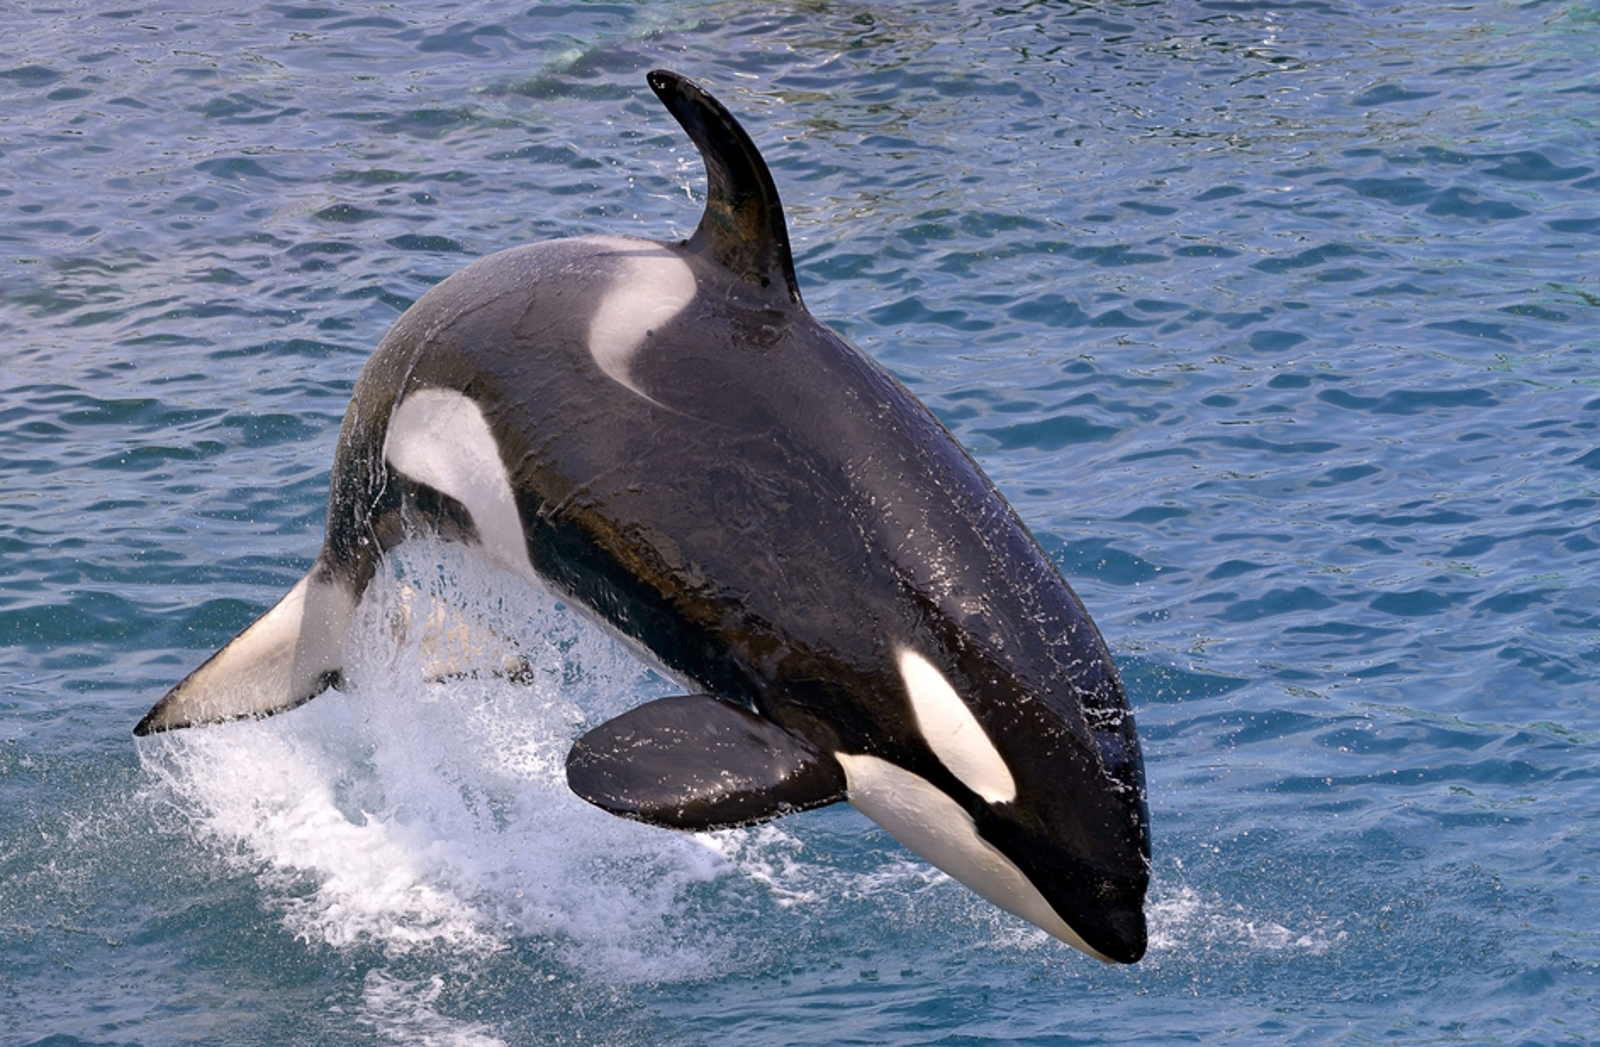 Help Stop Biggest Capture of Wild Orcas and Dolphins That is About to Take Place in Namibia